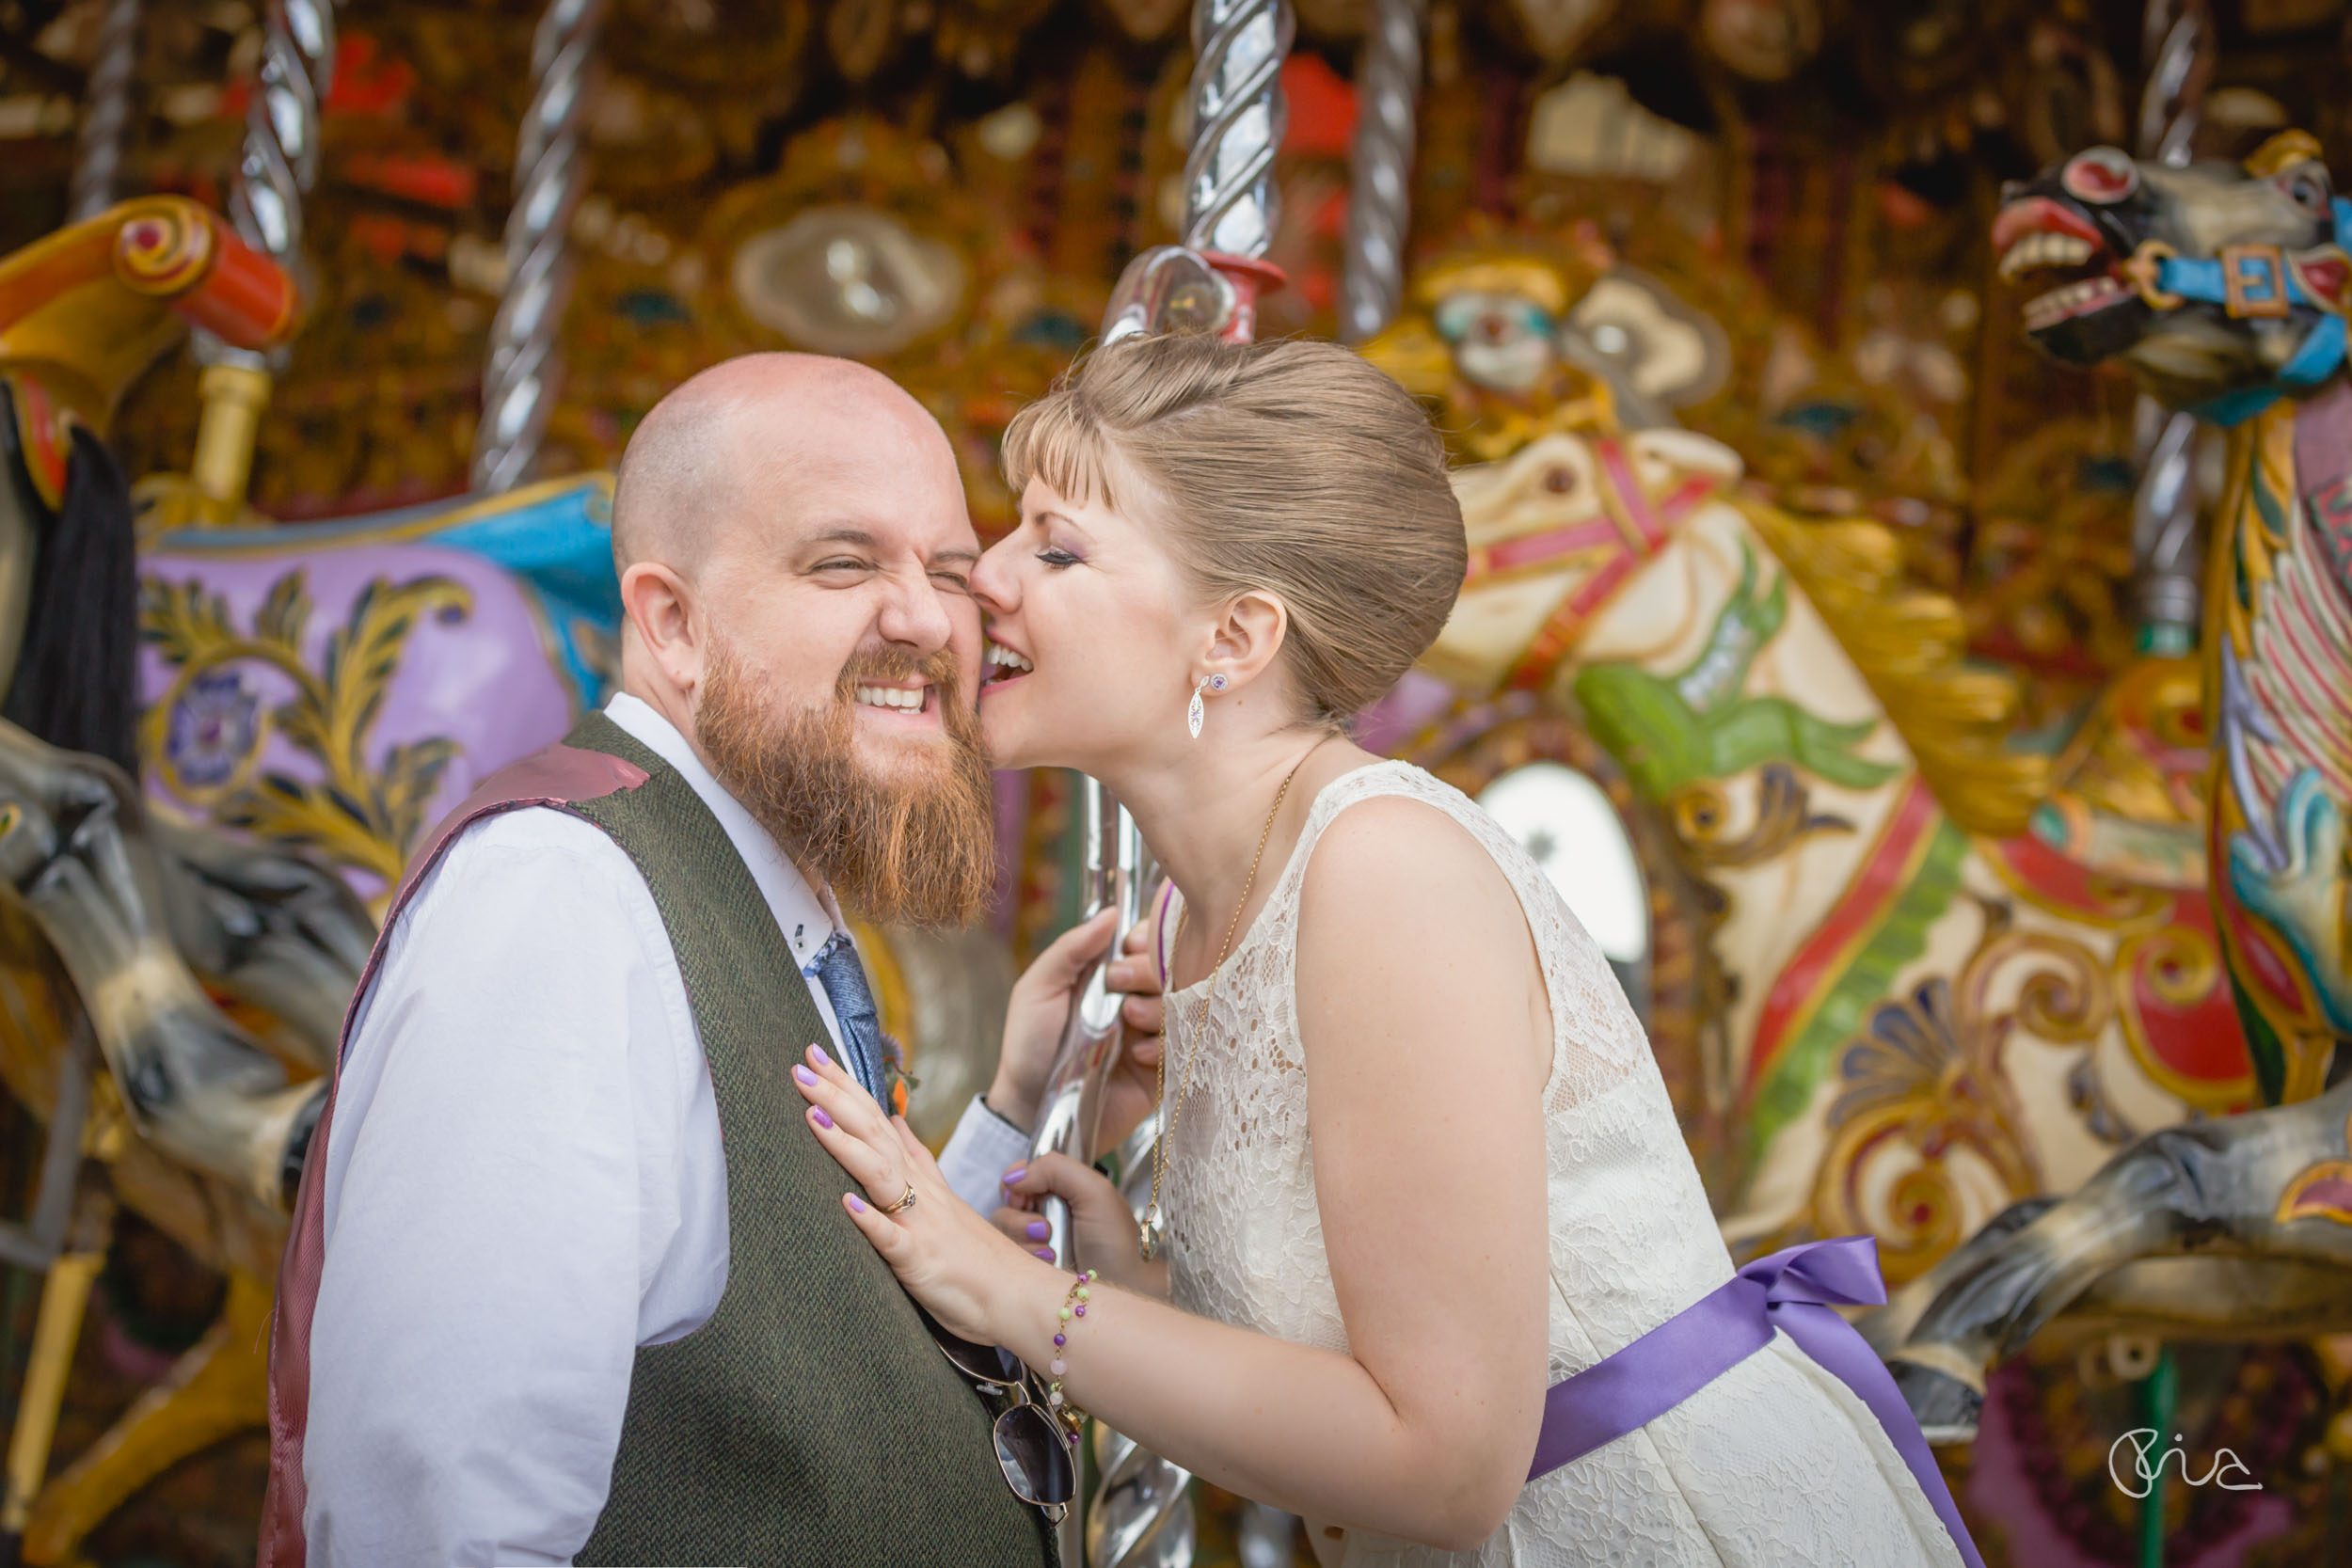 Bridal and groom at Pangdean Barn in East Sussex